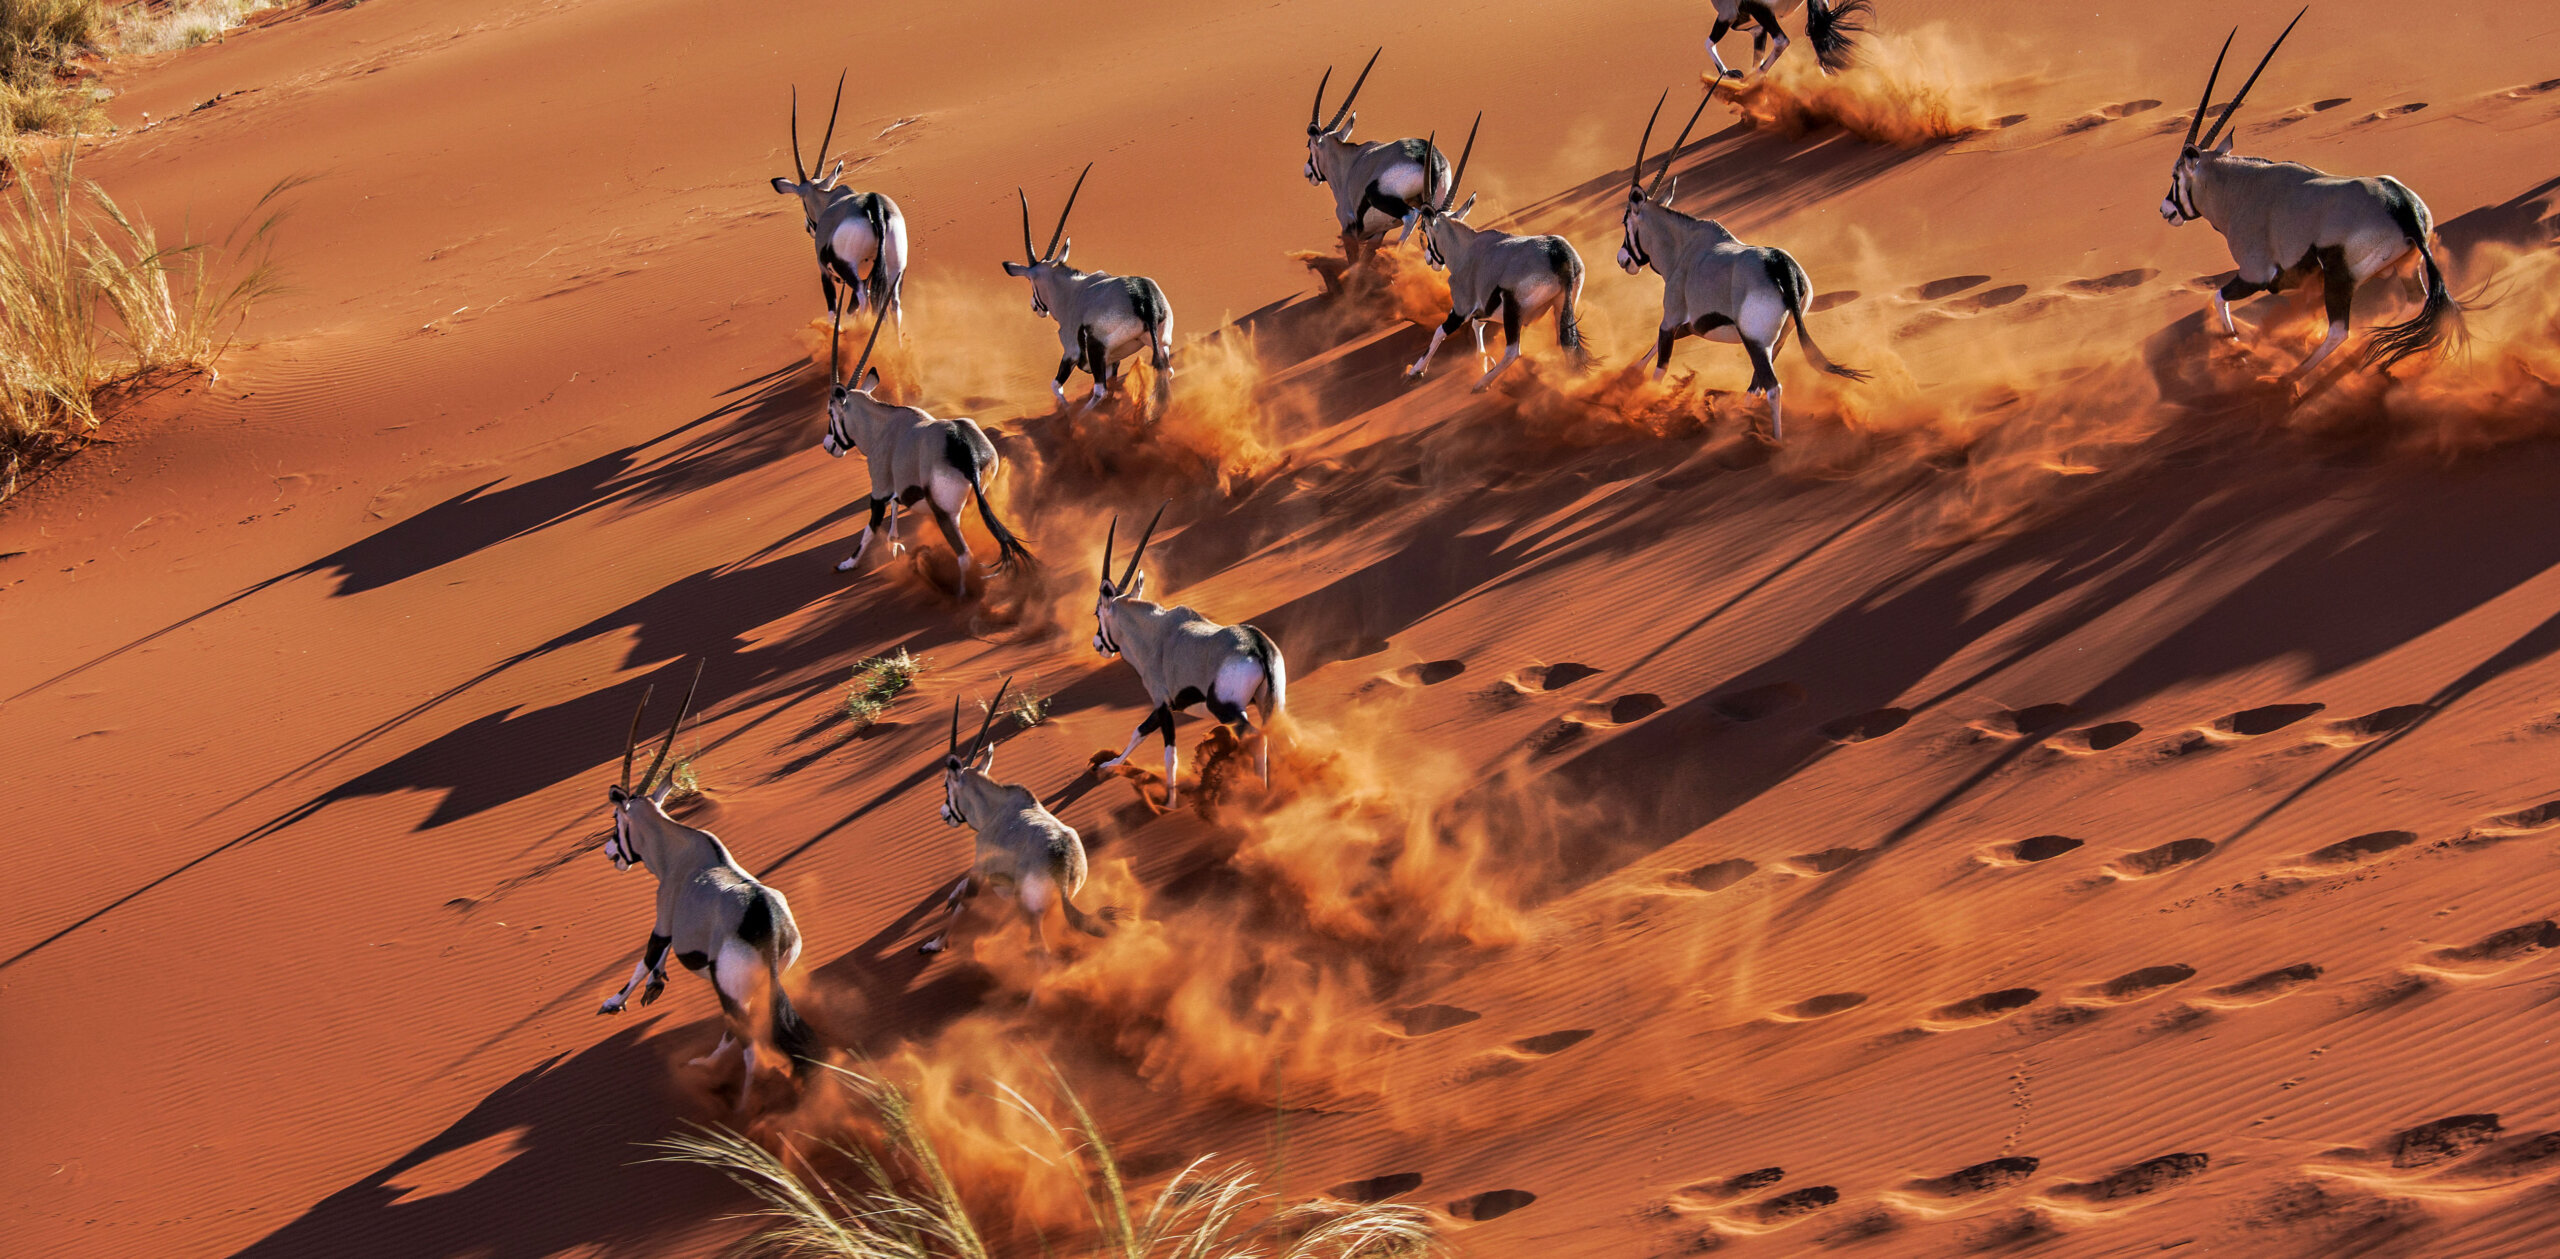 Namibia - Endless Deserts and Exotic Animals